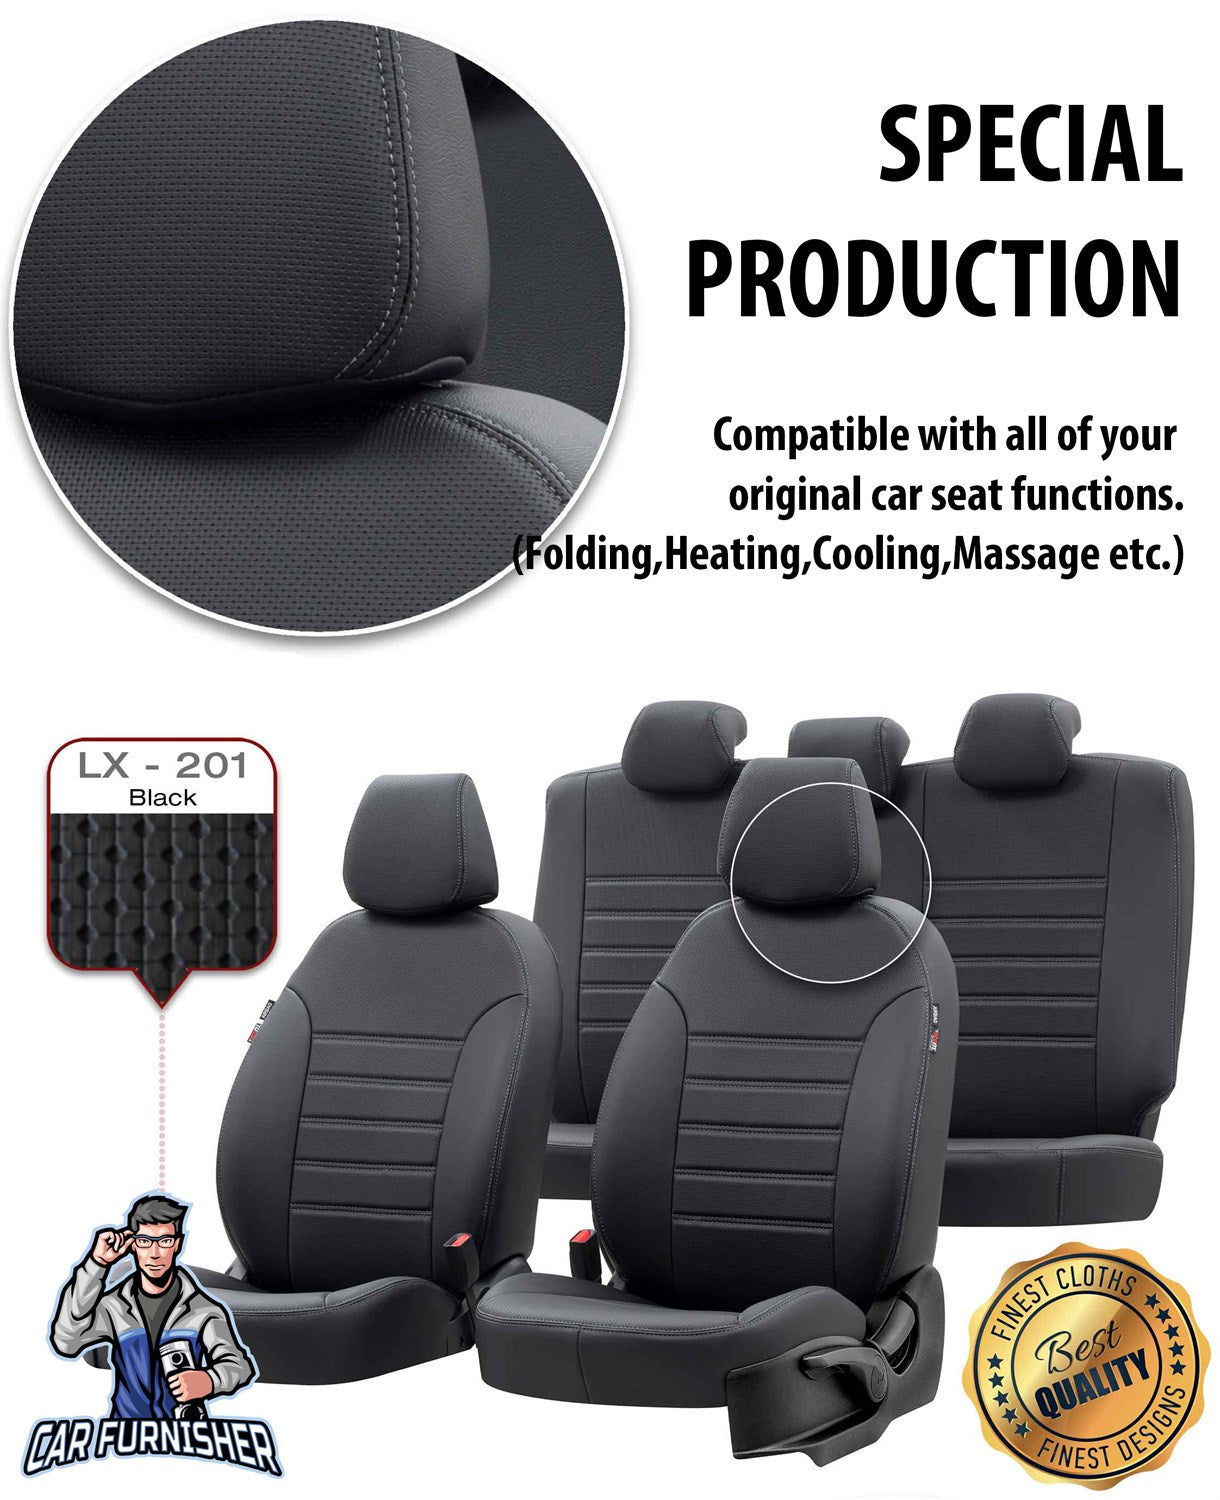 Fiat Fullback Seat Covers New York Leather Design Smoked Black Leather